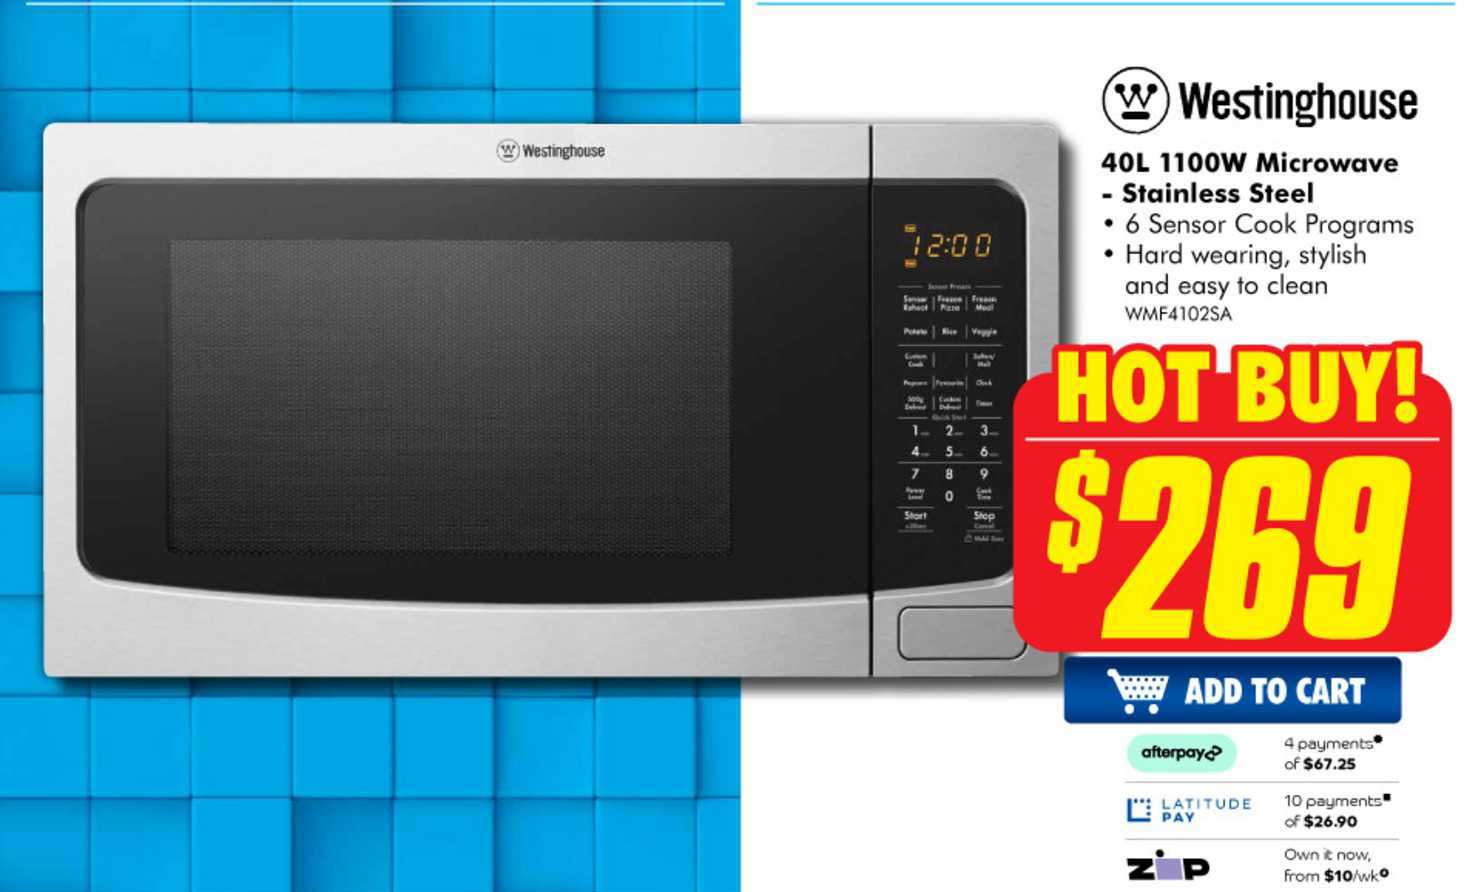 Westinghouse 40l 1100w Microwave - Stainless Steel Offer at The Good Guys